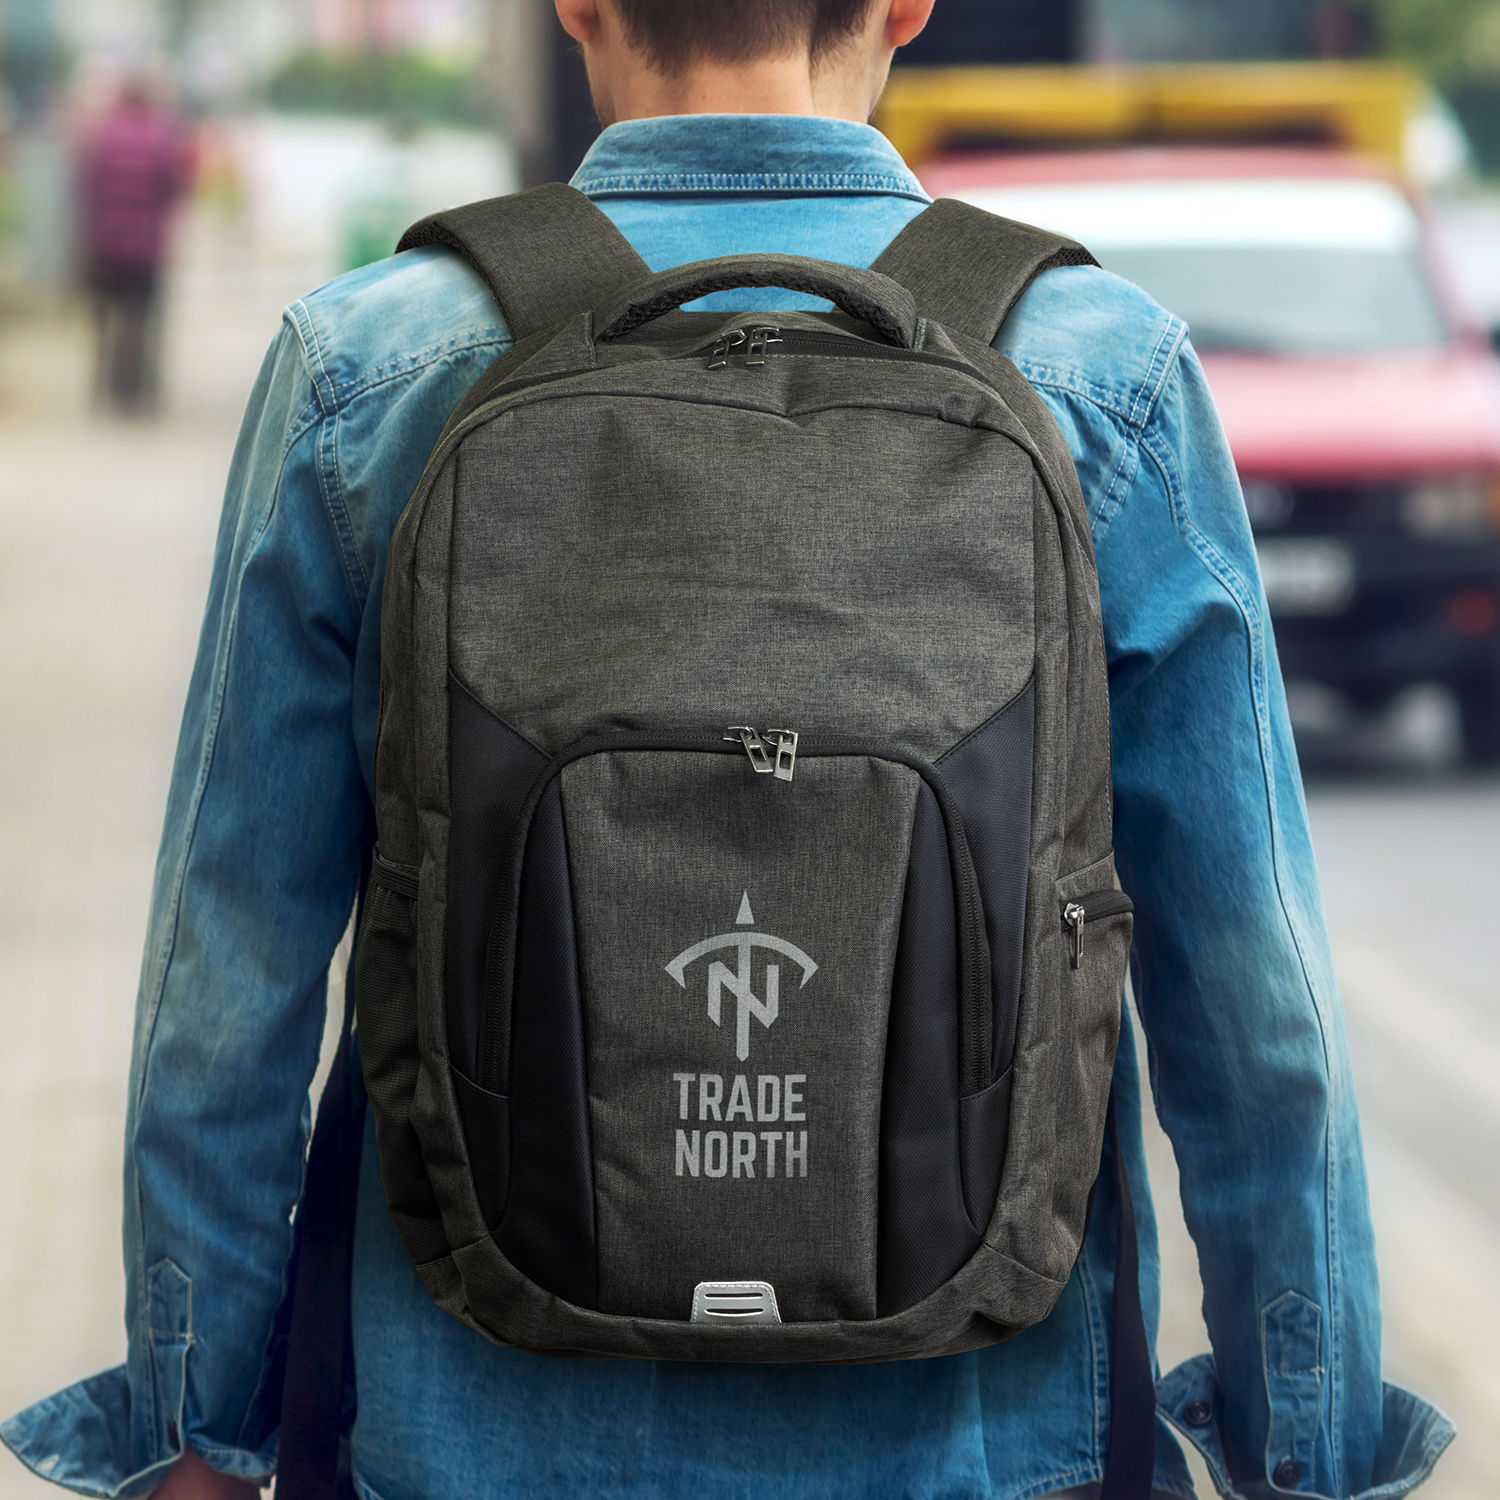 Elevate your backpack customisation with data-driven marketing insights